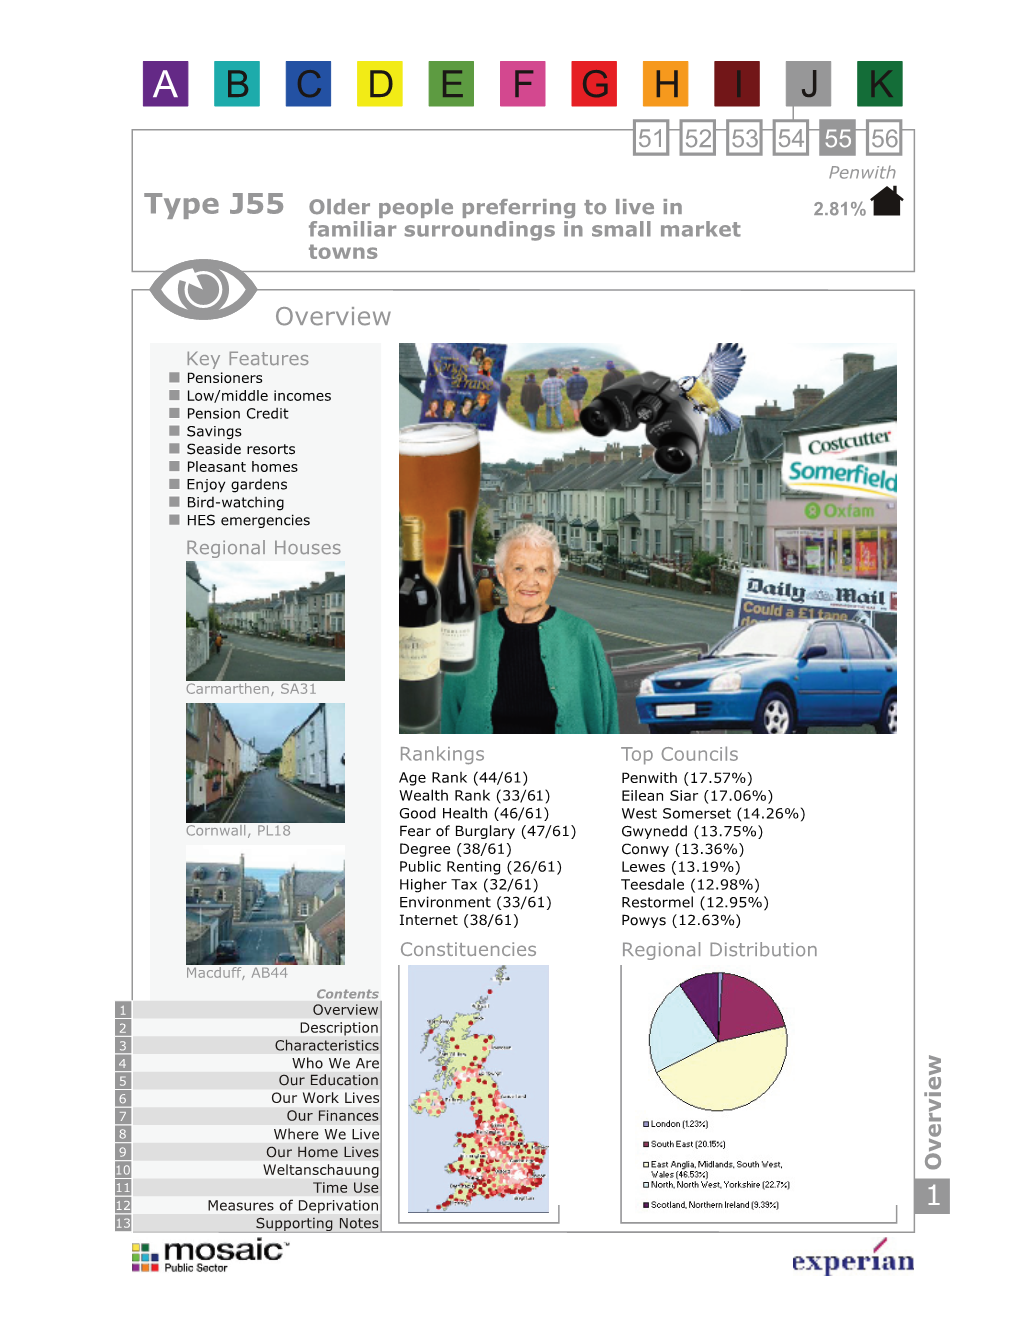 Type J55 Older People Preferring to Live in 2.81% Familiar Surroundings in Small Market Towns